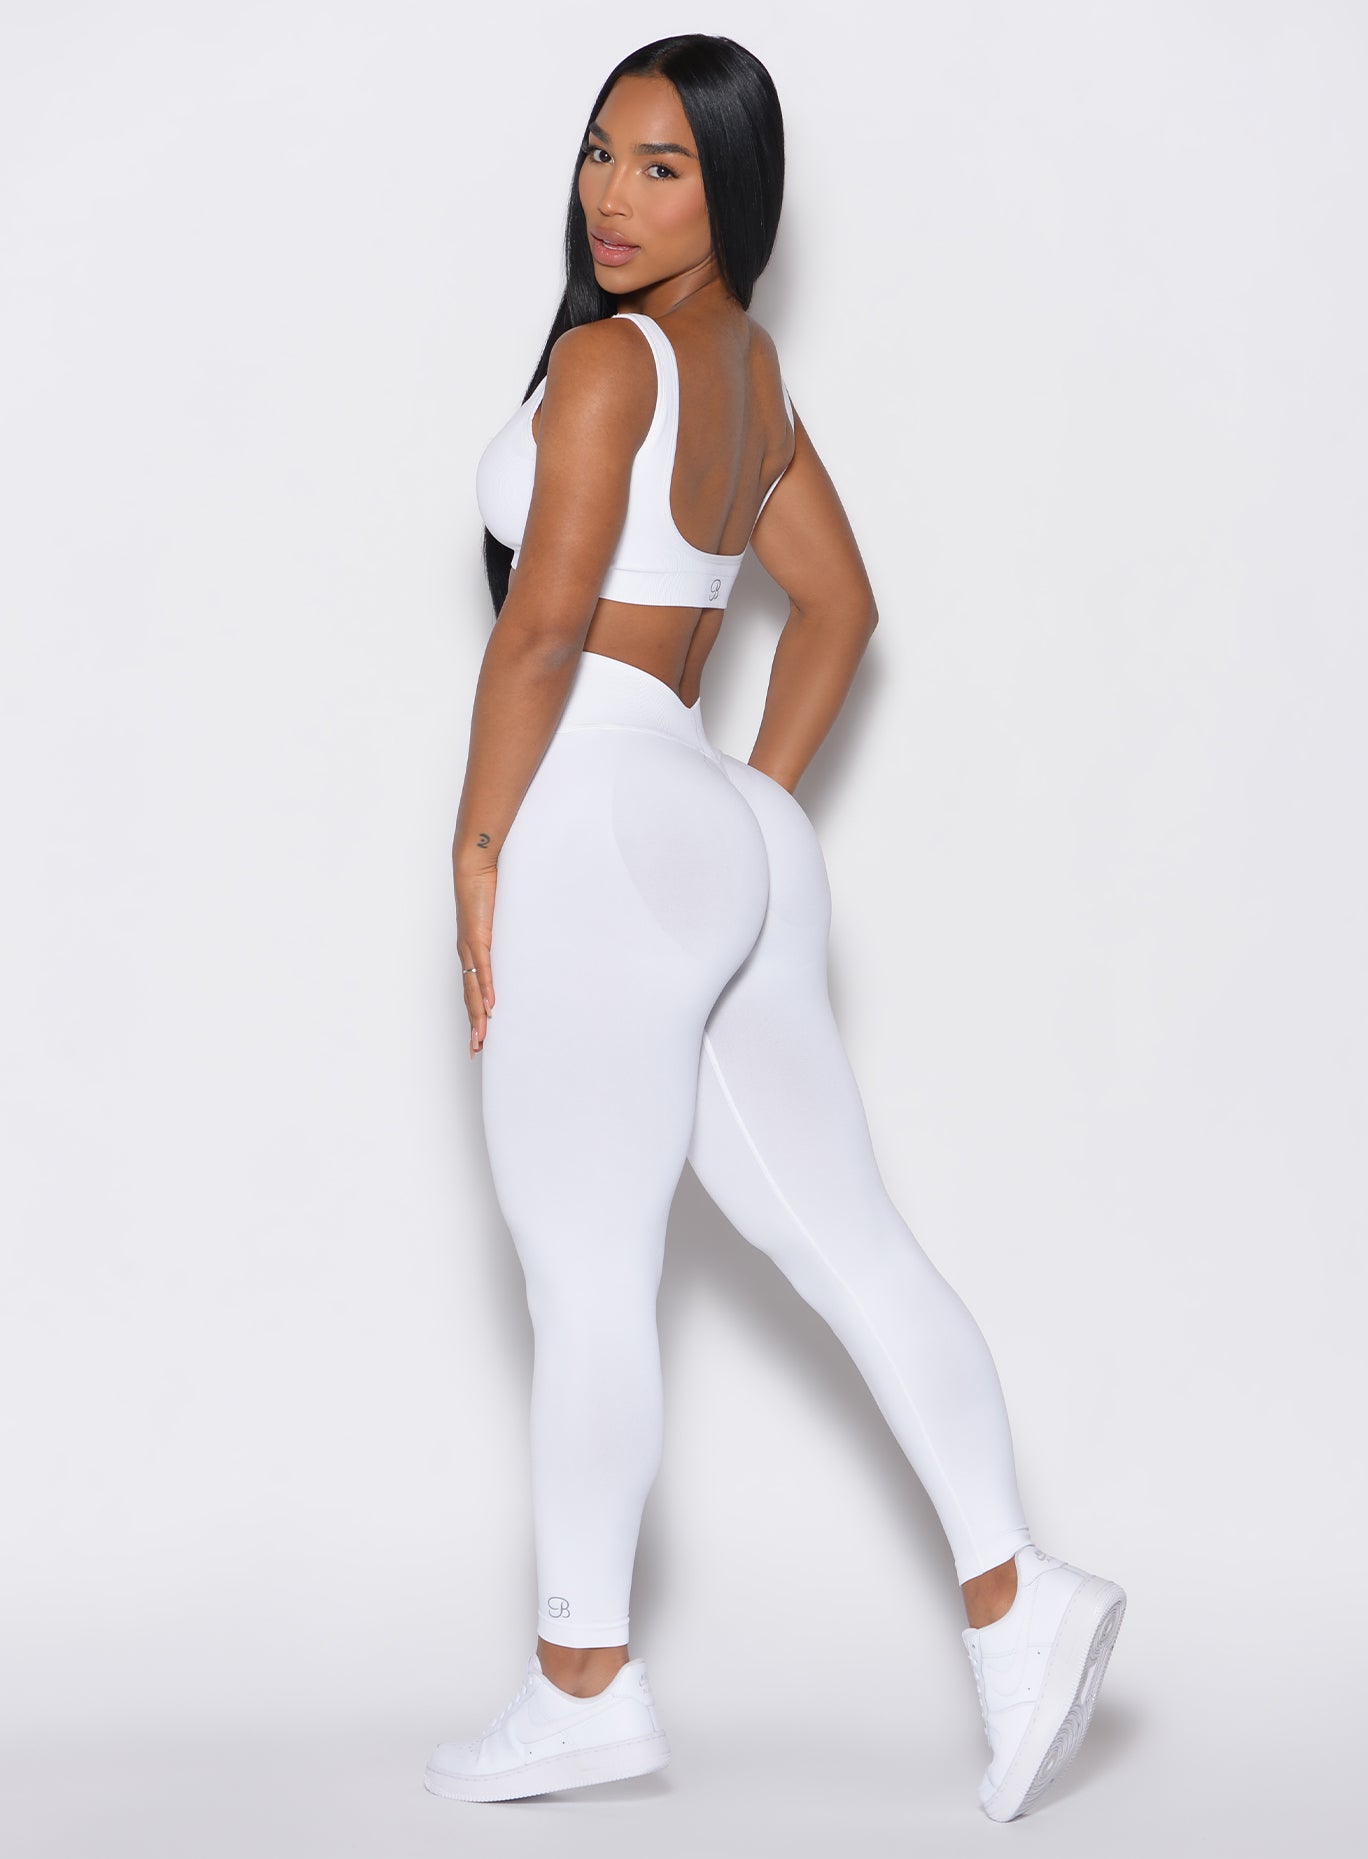 left side profile view of a model facing to her left wearing our white V Seamless Leggings along with a matching sports bra